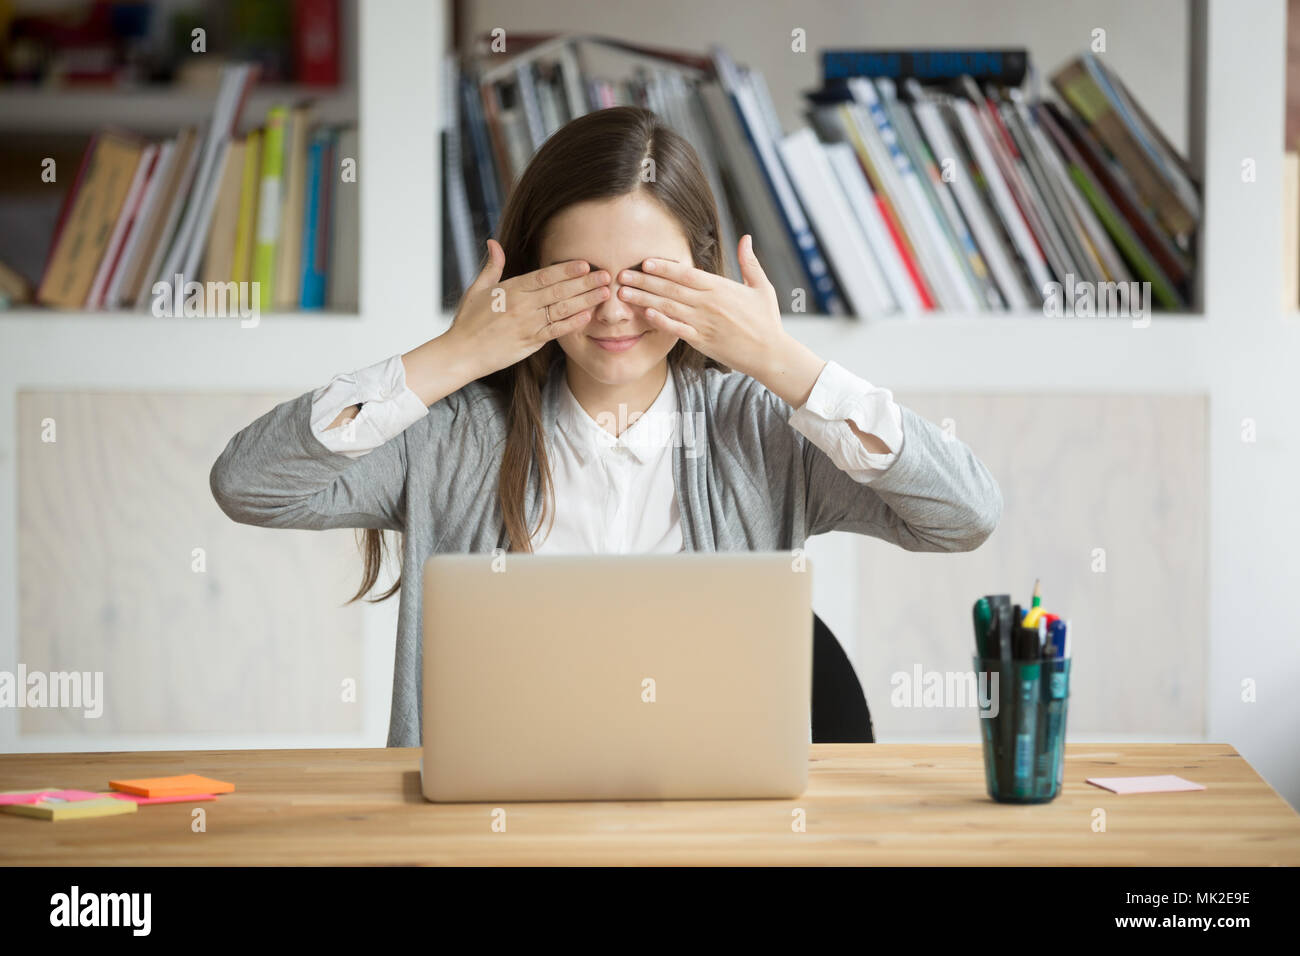 Young female worker playing childish covering eyes with hands Stock Photo